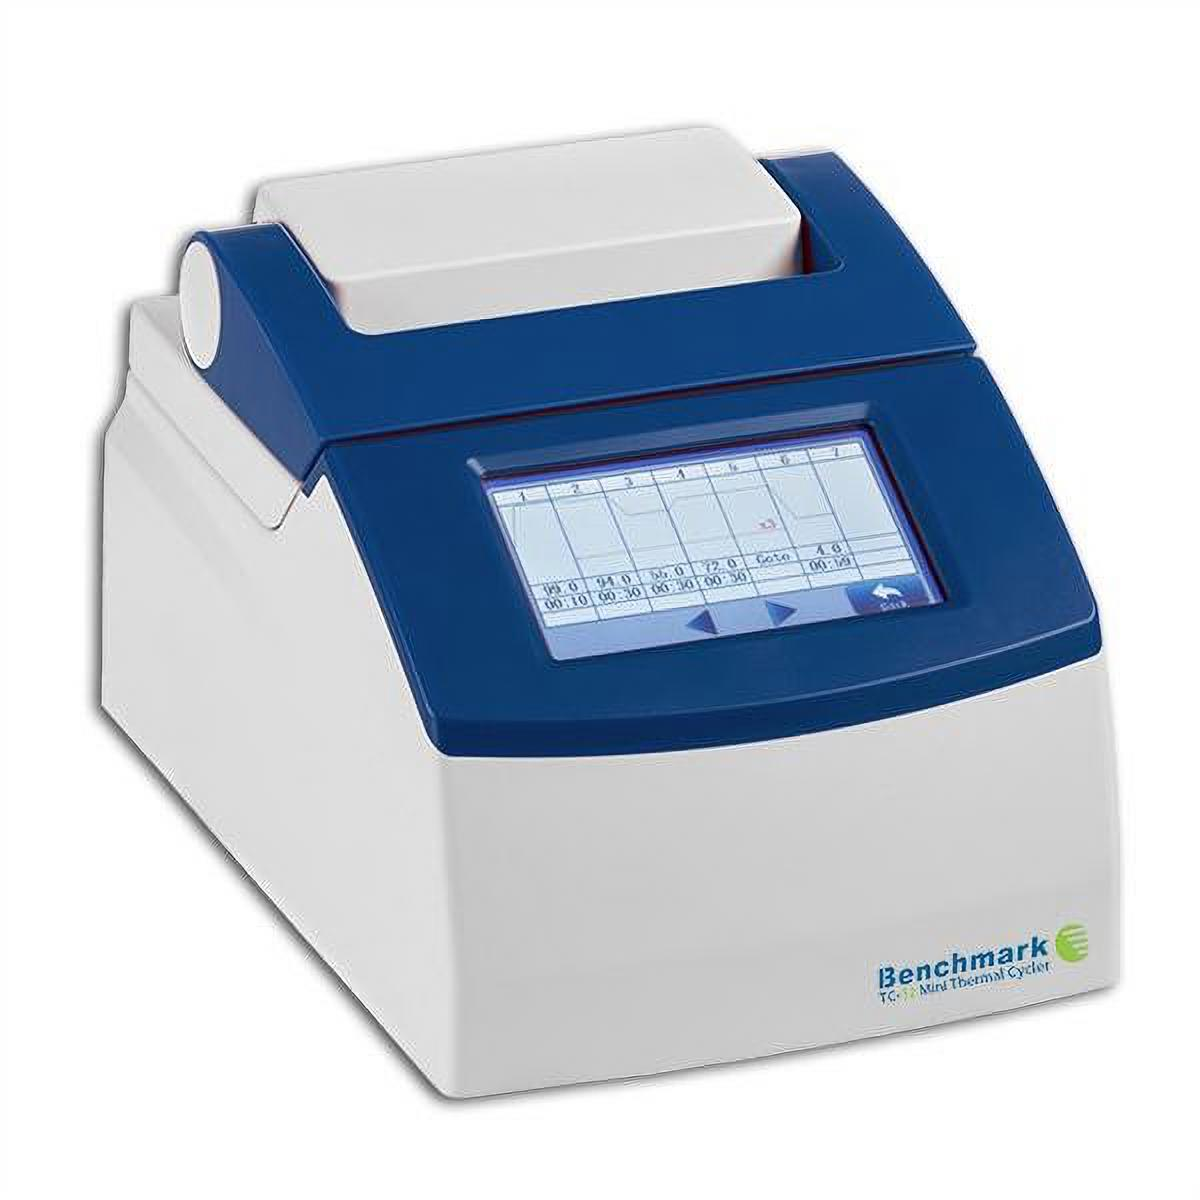 thermal-cycler-multiply-and-amplify-dna-segments-through-pcr